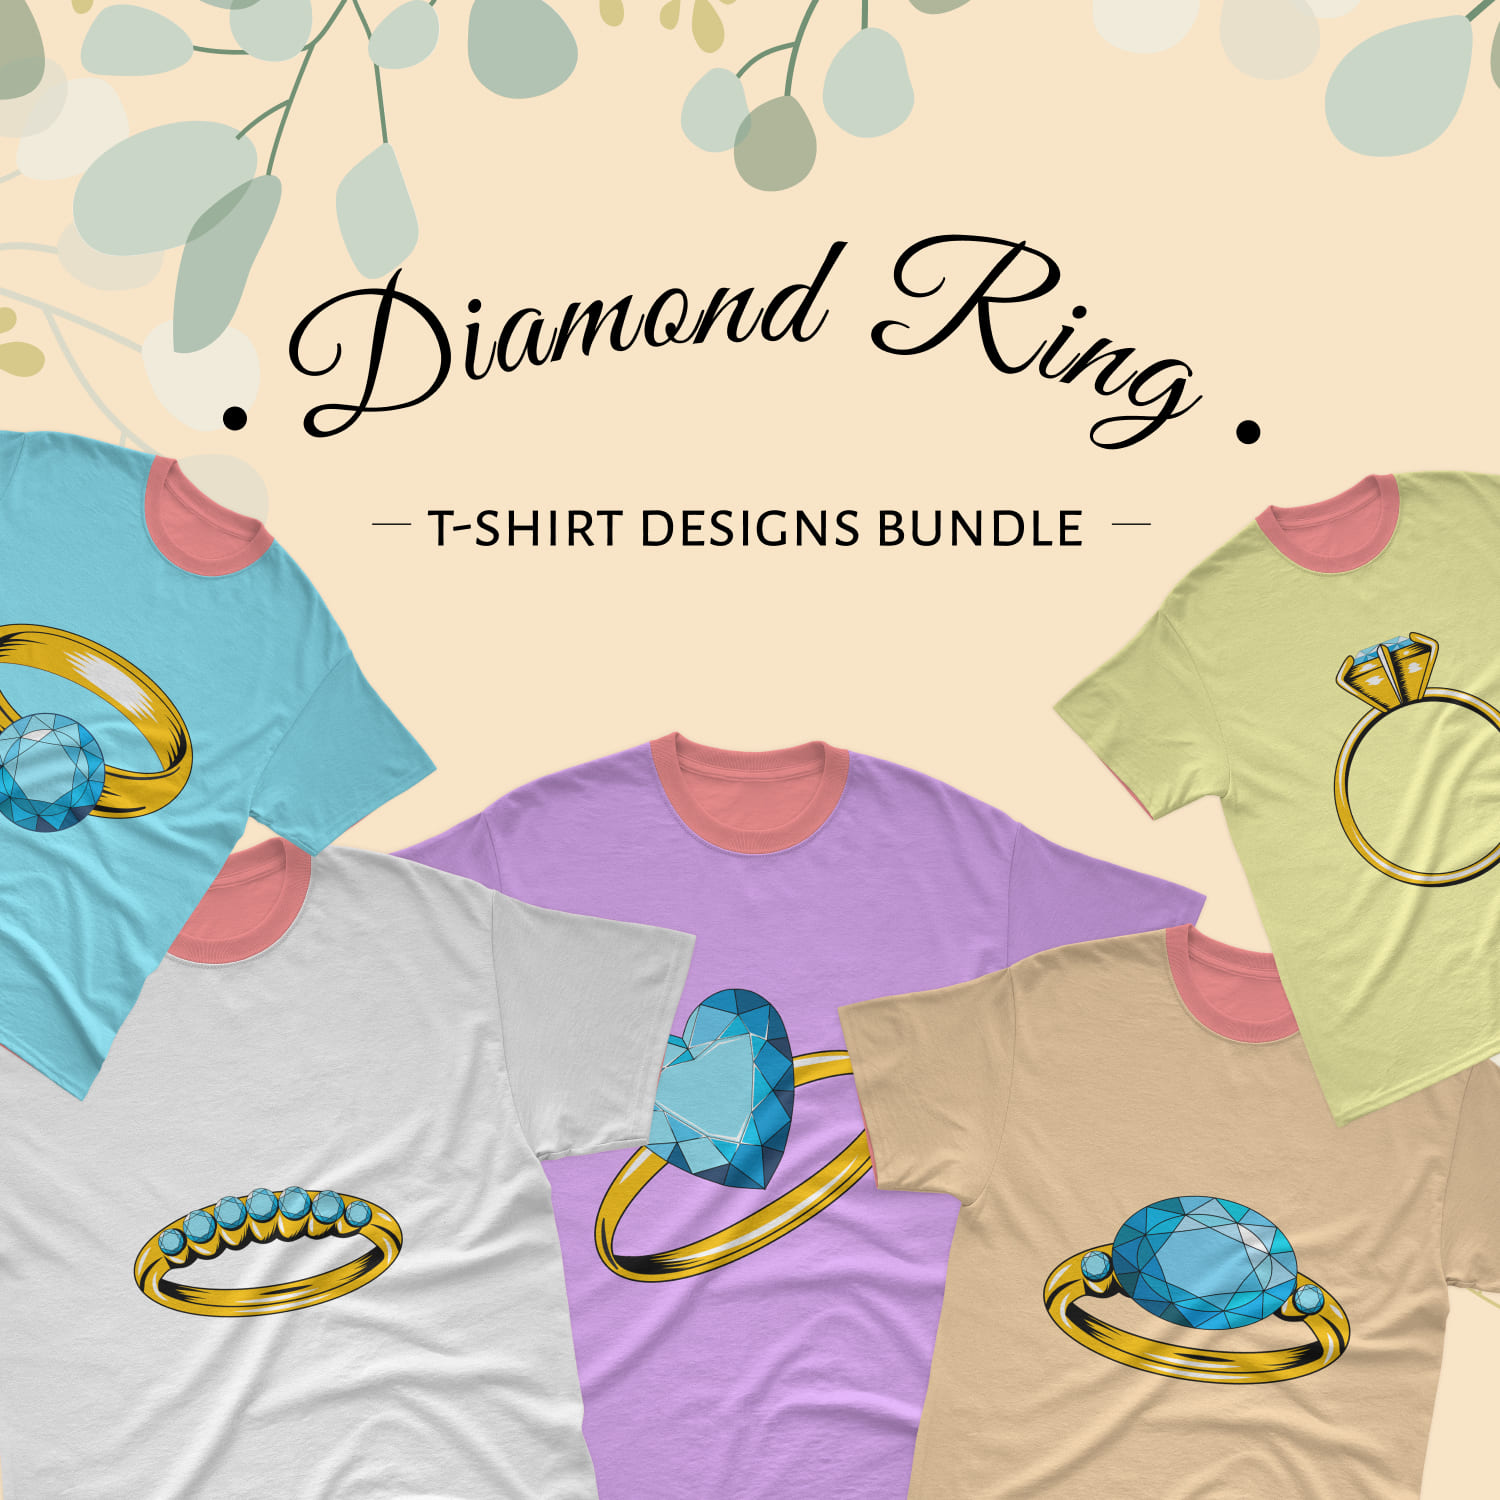 A selection of images of T-shirts with gorgeous diamond ring prints.